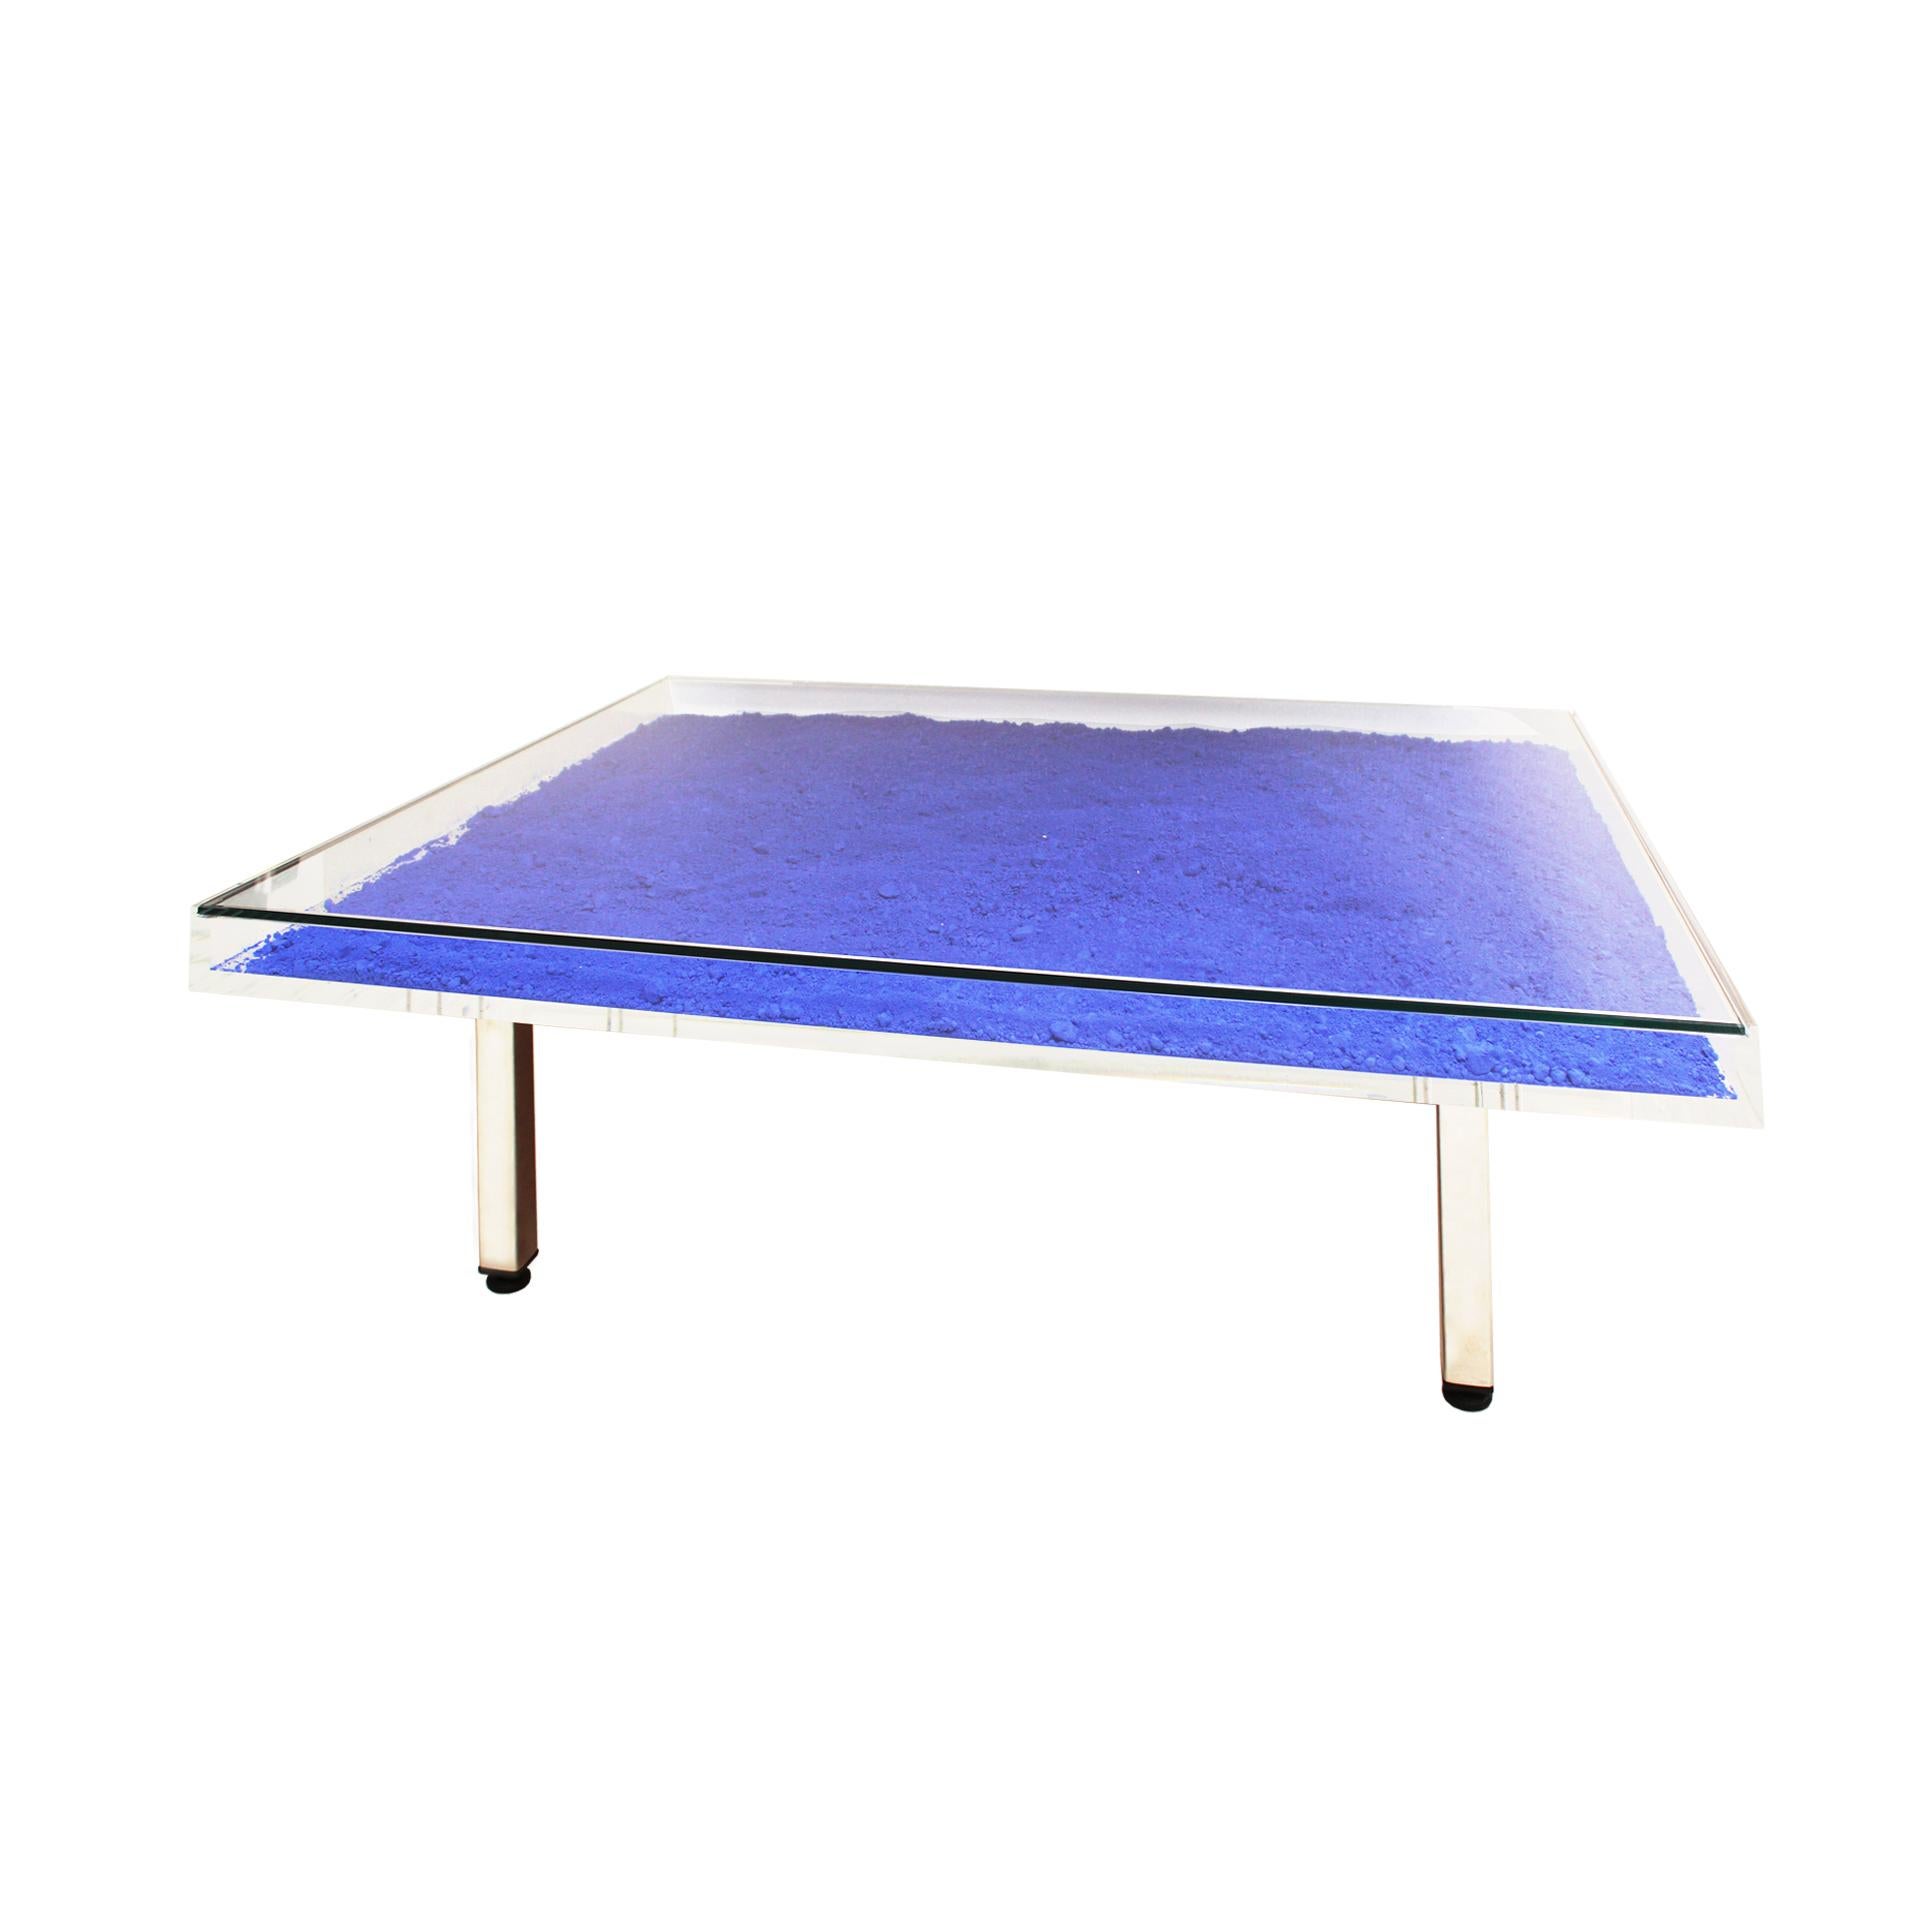 “IKB” model coffee table designed by the French artist Yves Klein (1928-1962). Table composed of a box made of perplex with a glass top lid inside which Klein blue pigments are distributed in powder format. Legs made of stainless steel. This piece